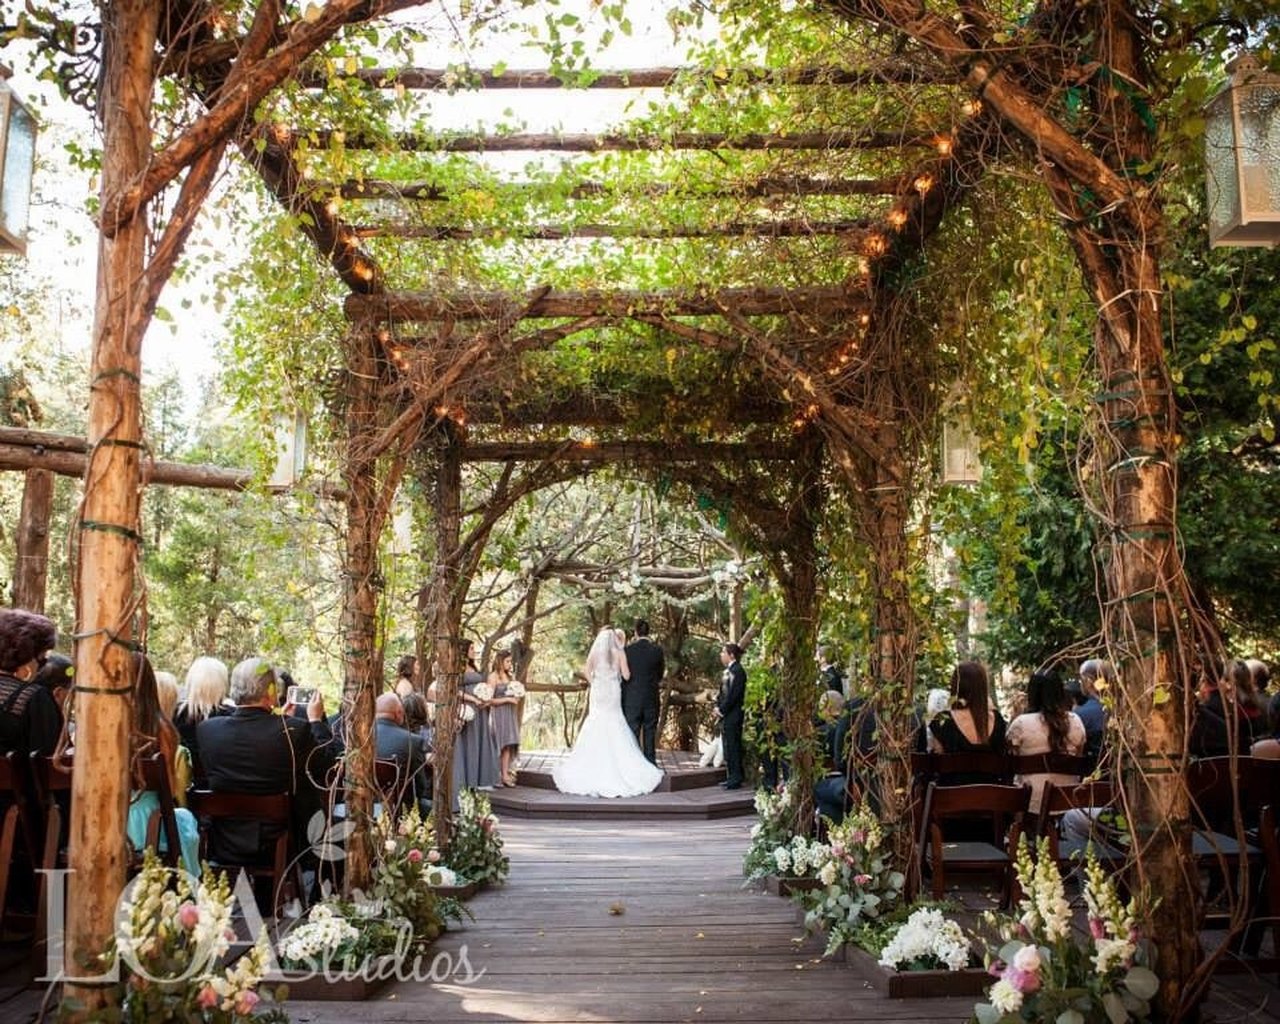 Epic Spots To Get Married In Southern California That Ll Blow Guests